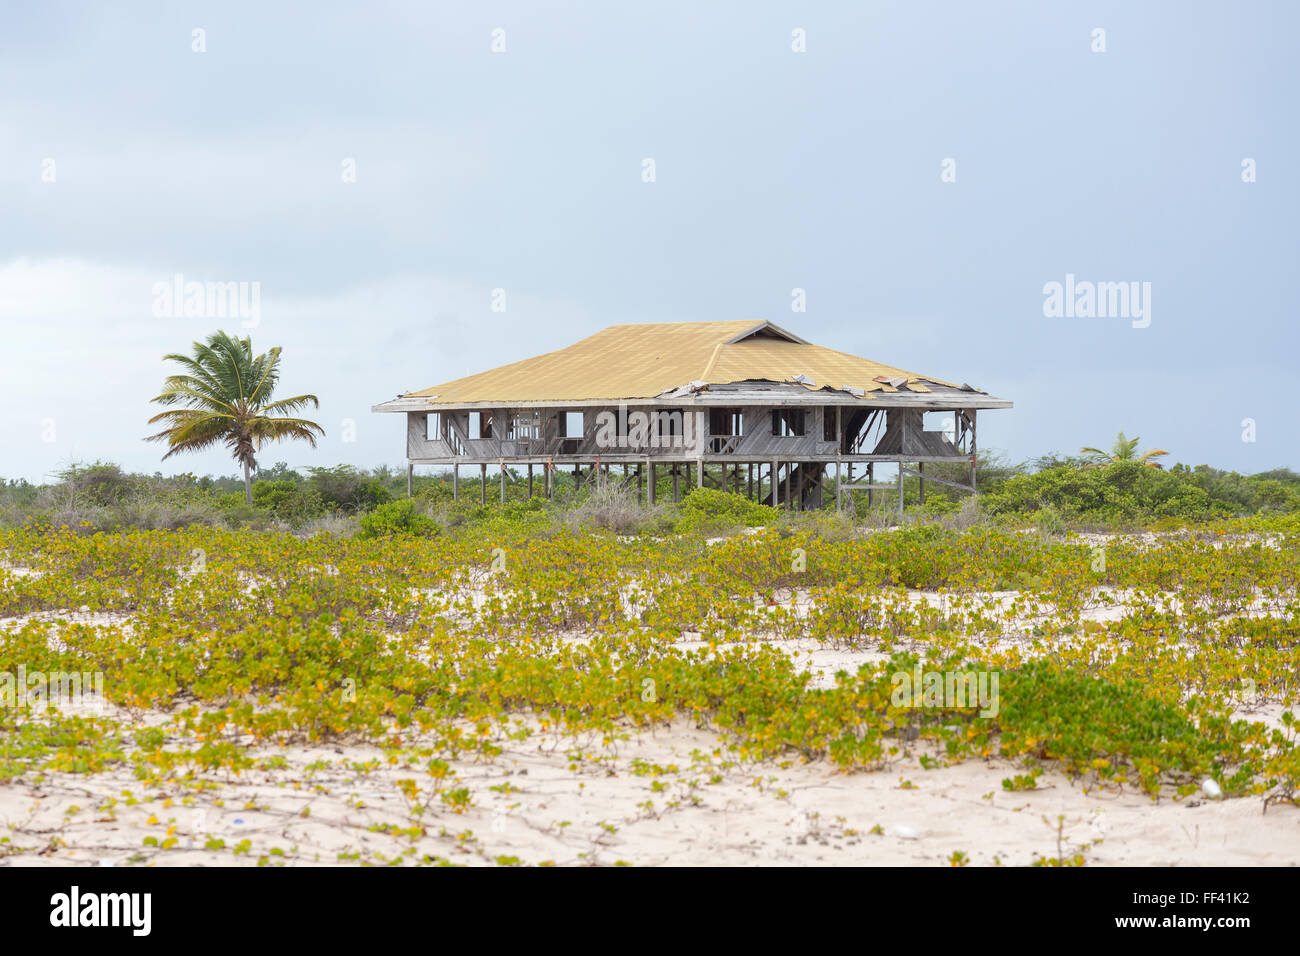 Derelict wooden building on stilts on a beach in south Barbuda, Antigua and Barbuda, West Indies Stock Photo